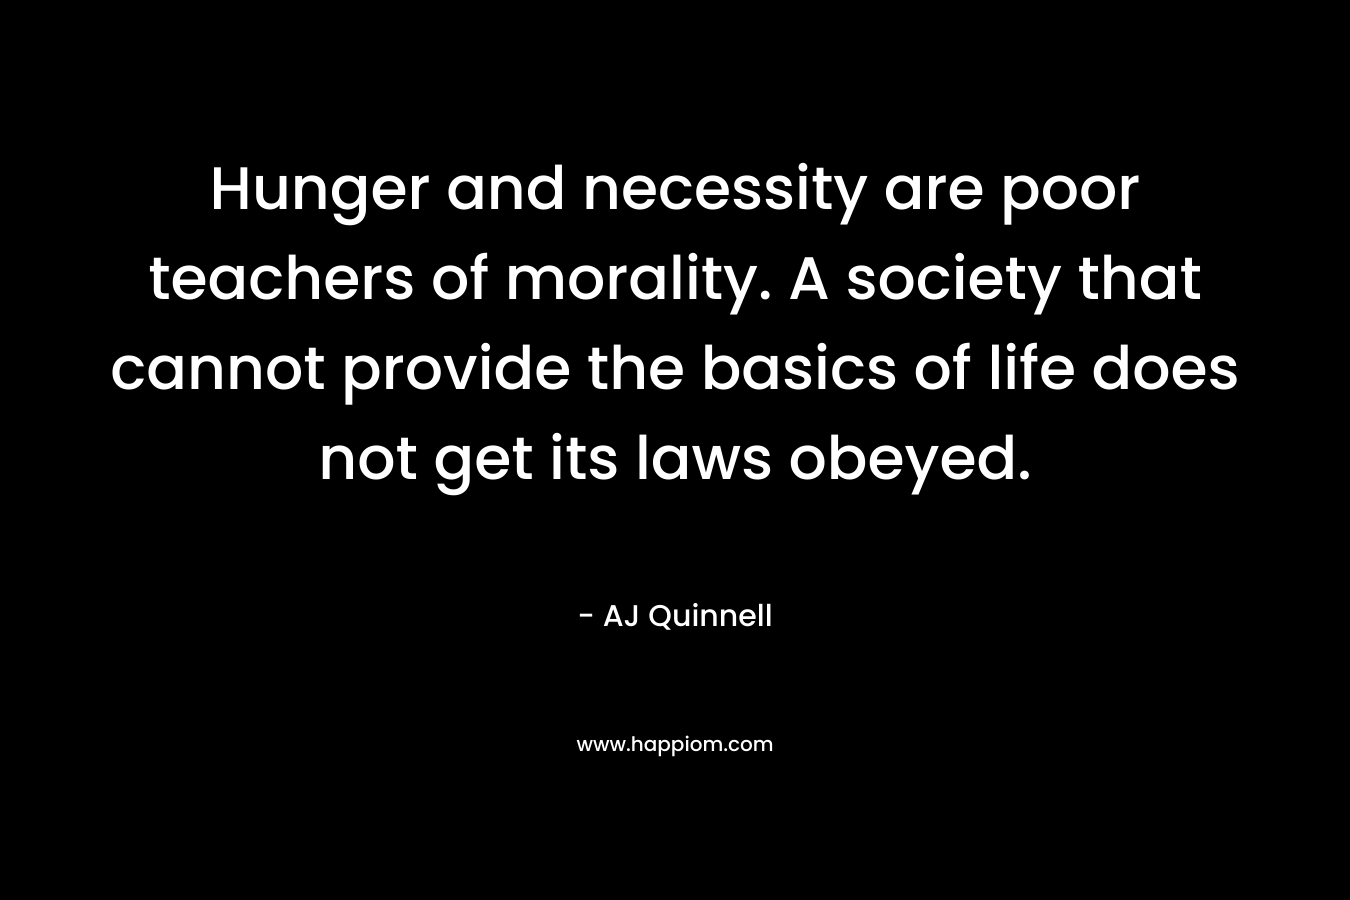 Hunger and necessity are poor teachers of morality. A society that cannot provide the basics of life does not get its laws obeyed. – AJ Quinnell